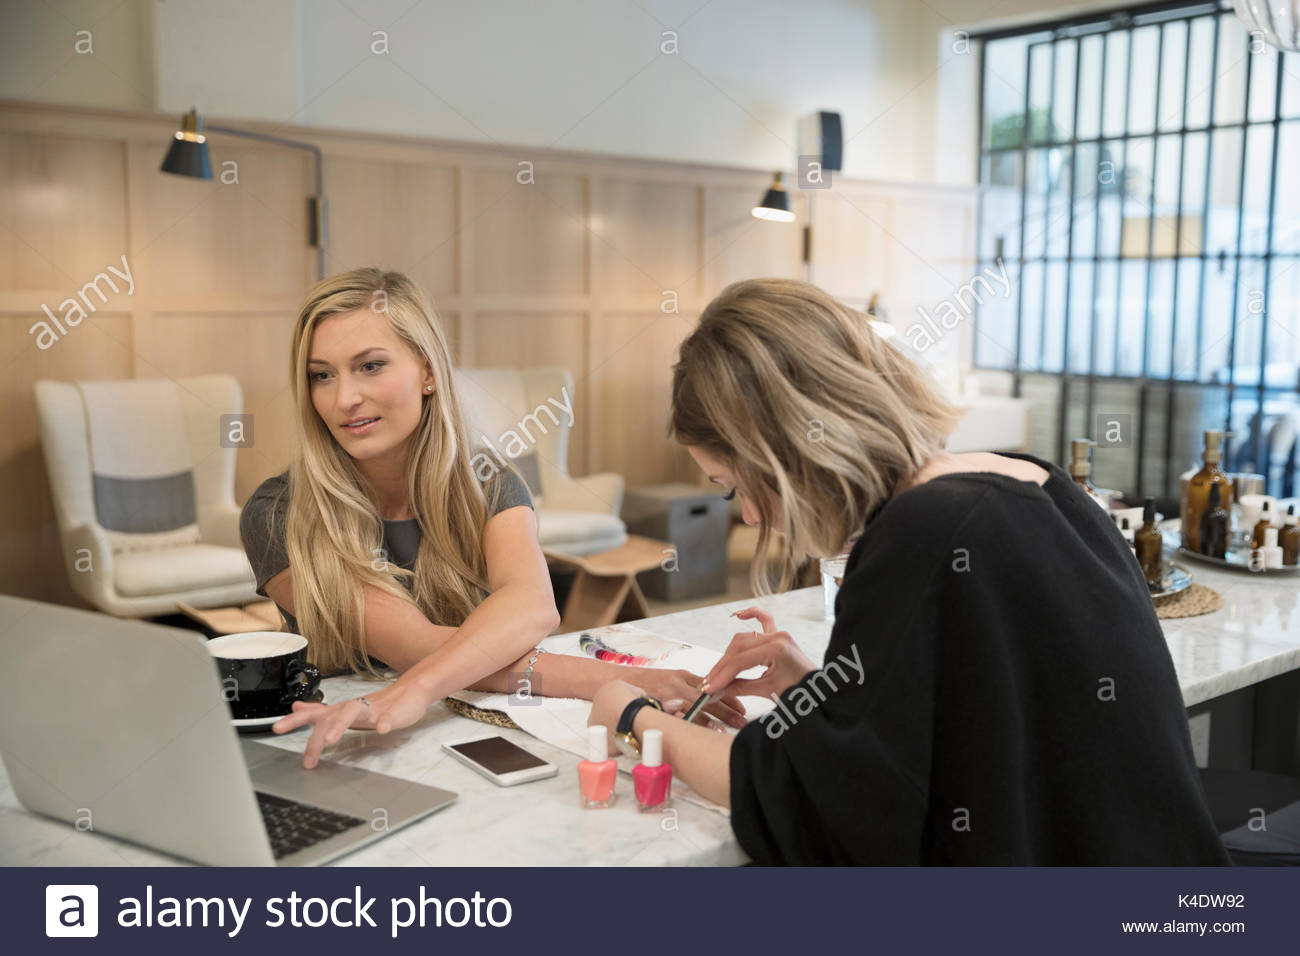 Female nail technician giving manicure to customer using laptop in nail salon Stock Photo